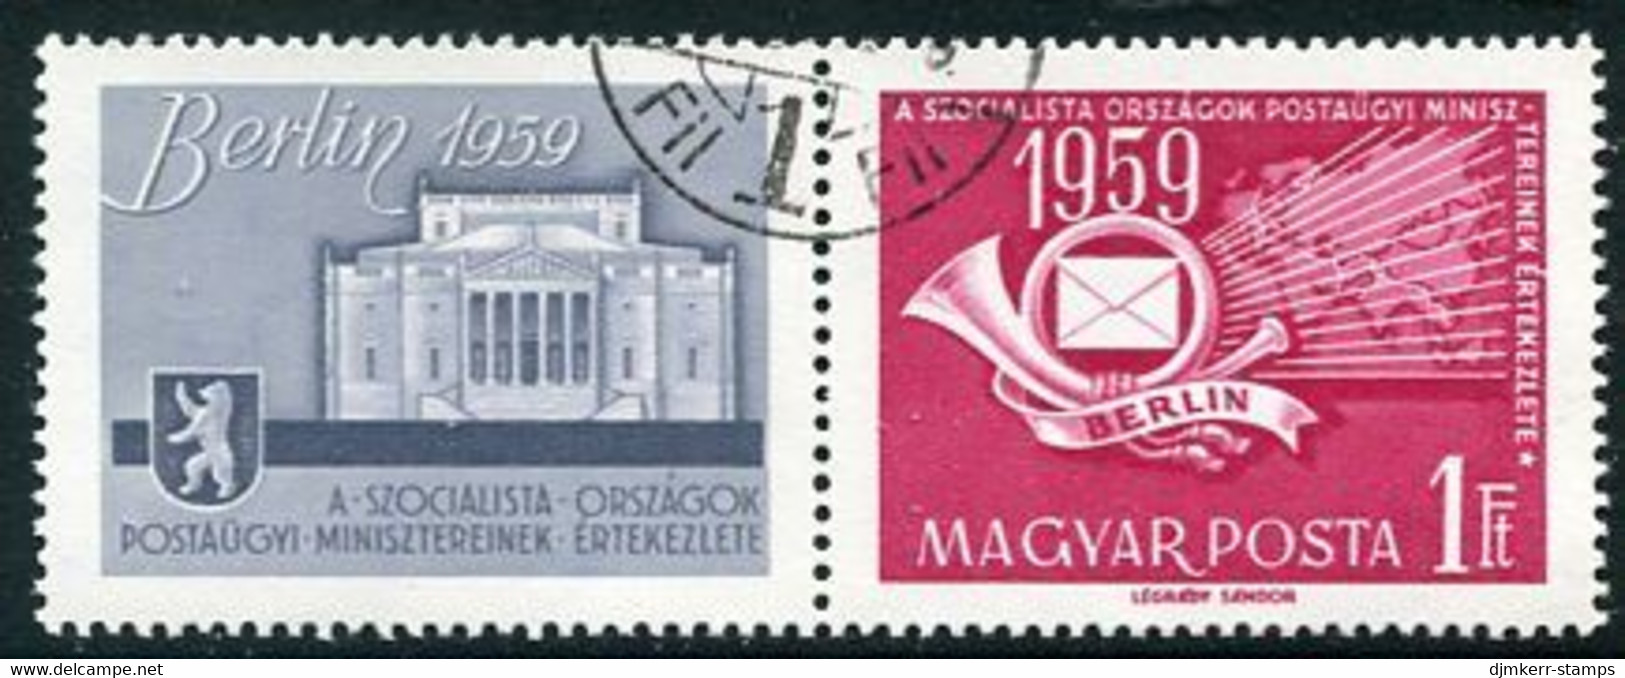 HUNGARY 1959 Socialist Minister's Postal Conference   Used.  Michel 1592 - Usado